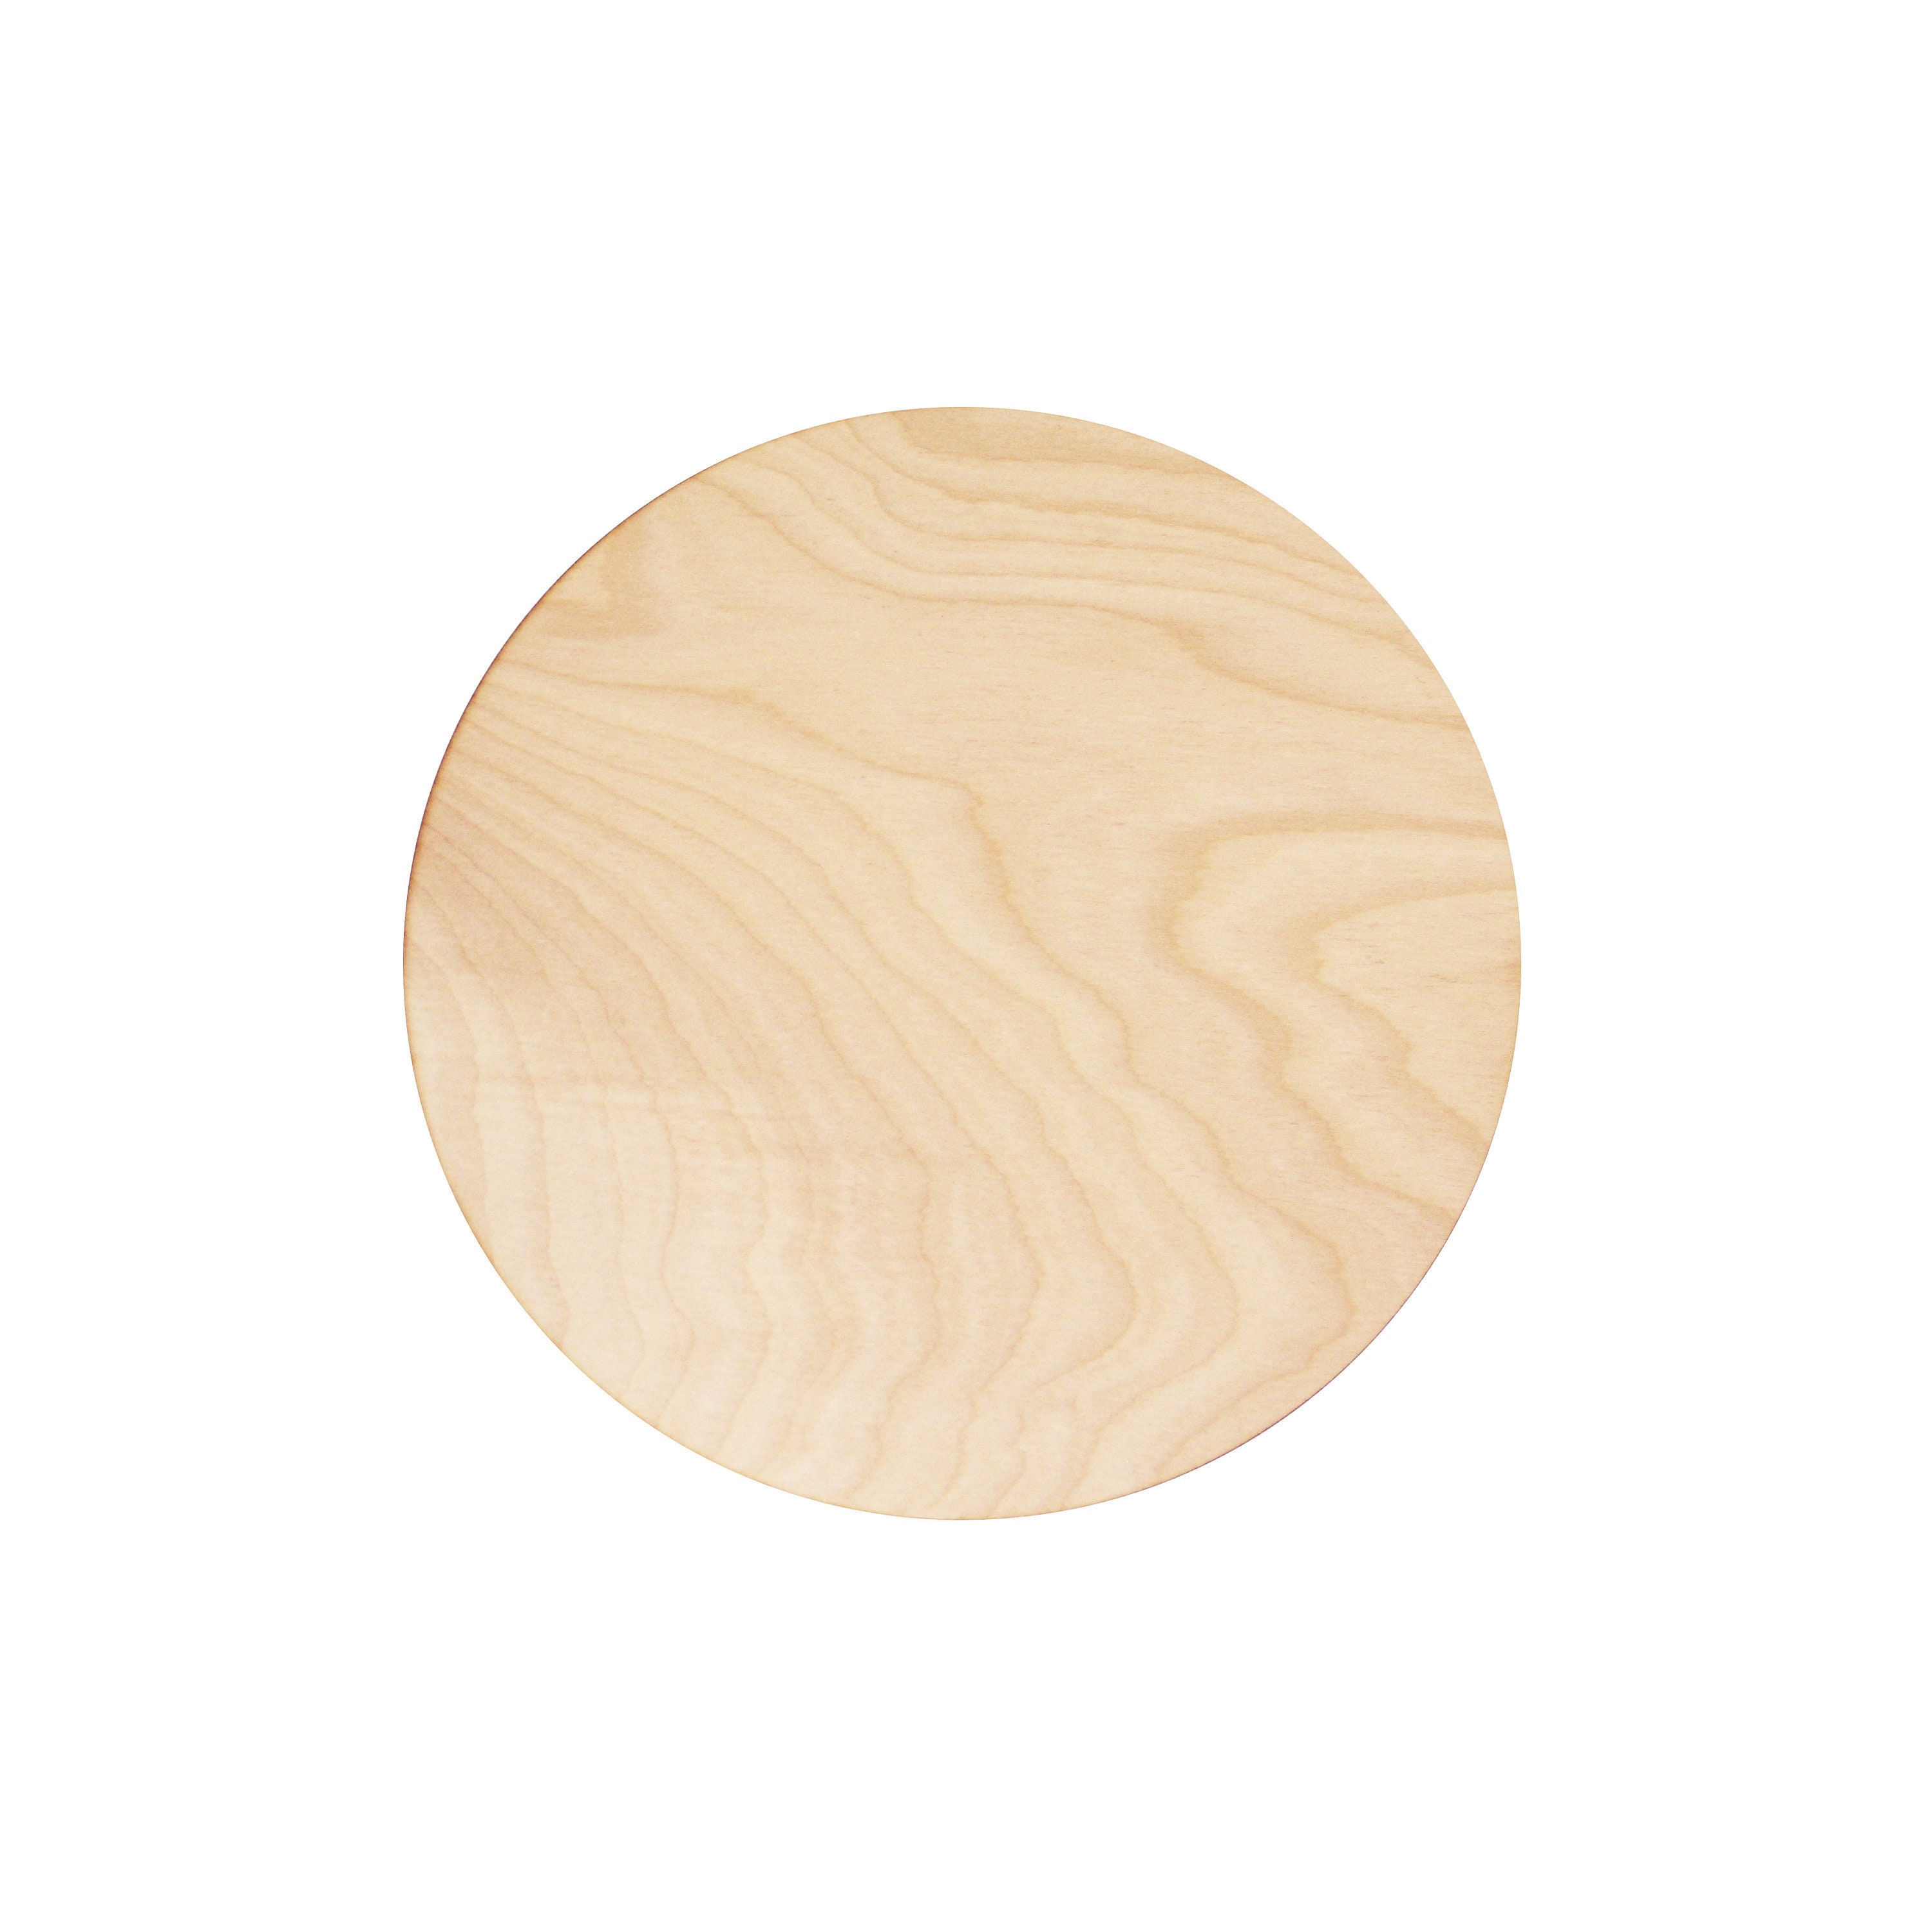 Woodpeckers Crafts Wood Circles 14 In 1/2 In Thick, Unfinished Birch  Plaques- Pack Of 10 in the Craft Supplies department at